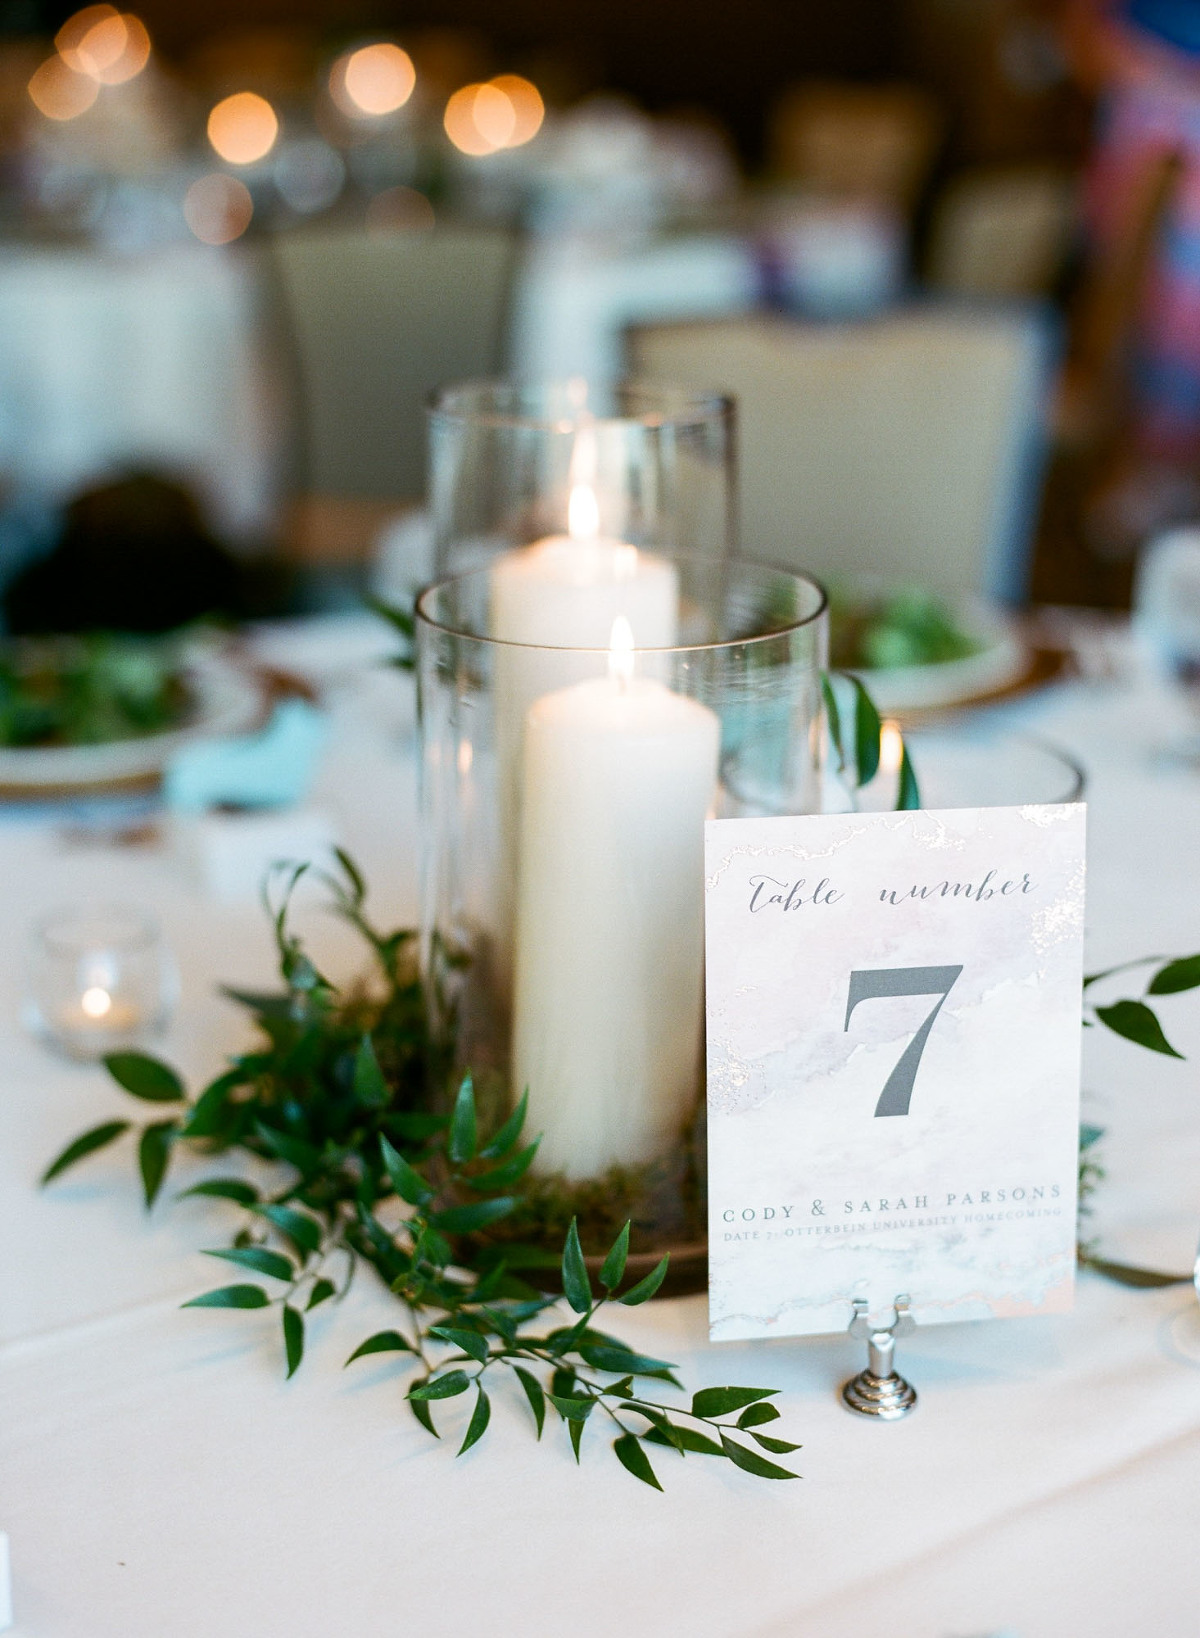 Candles and greenery centerpieces